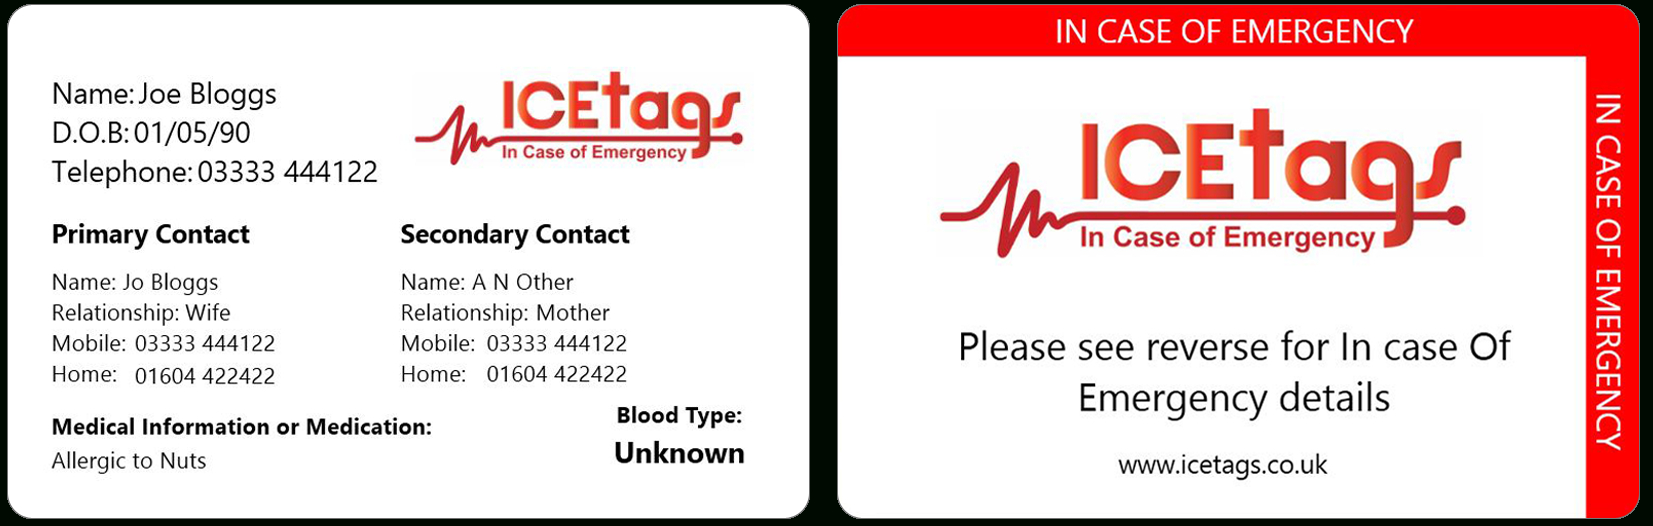 Ice Wallet Card | Full Size Icetags | Free Uk Delivery Throughout In Case Of Emergency Card Template